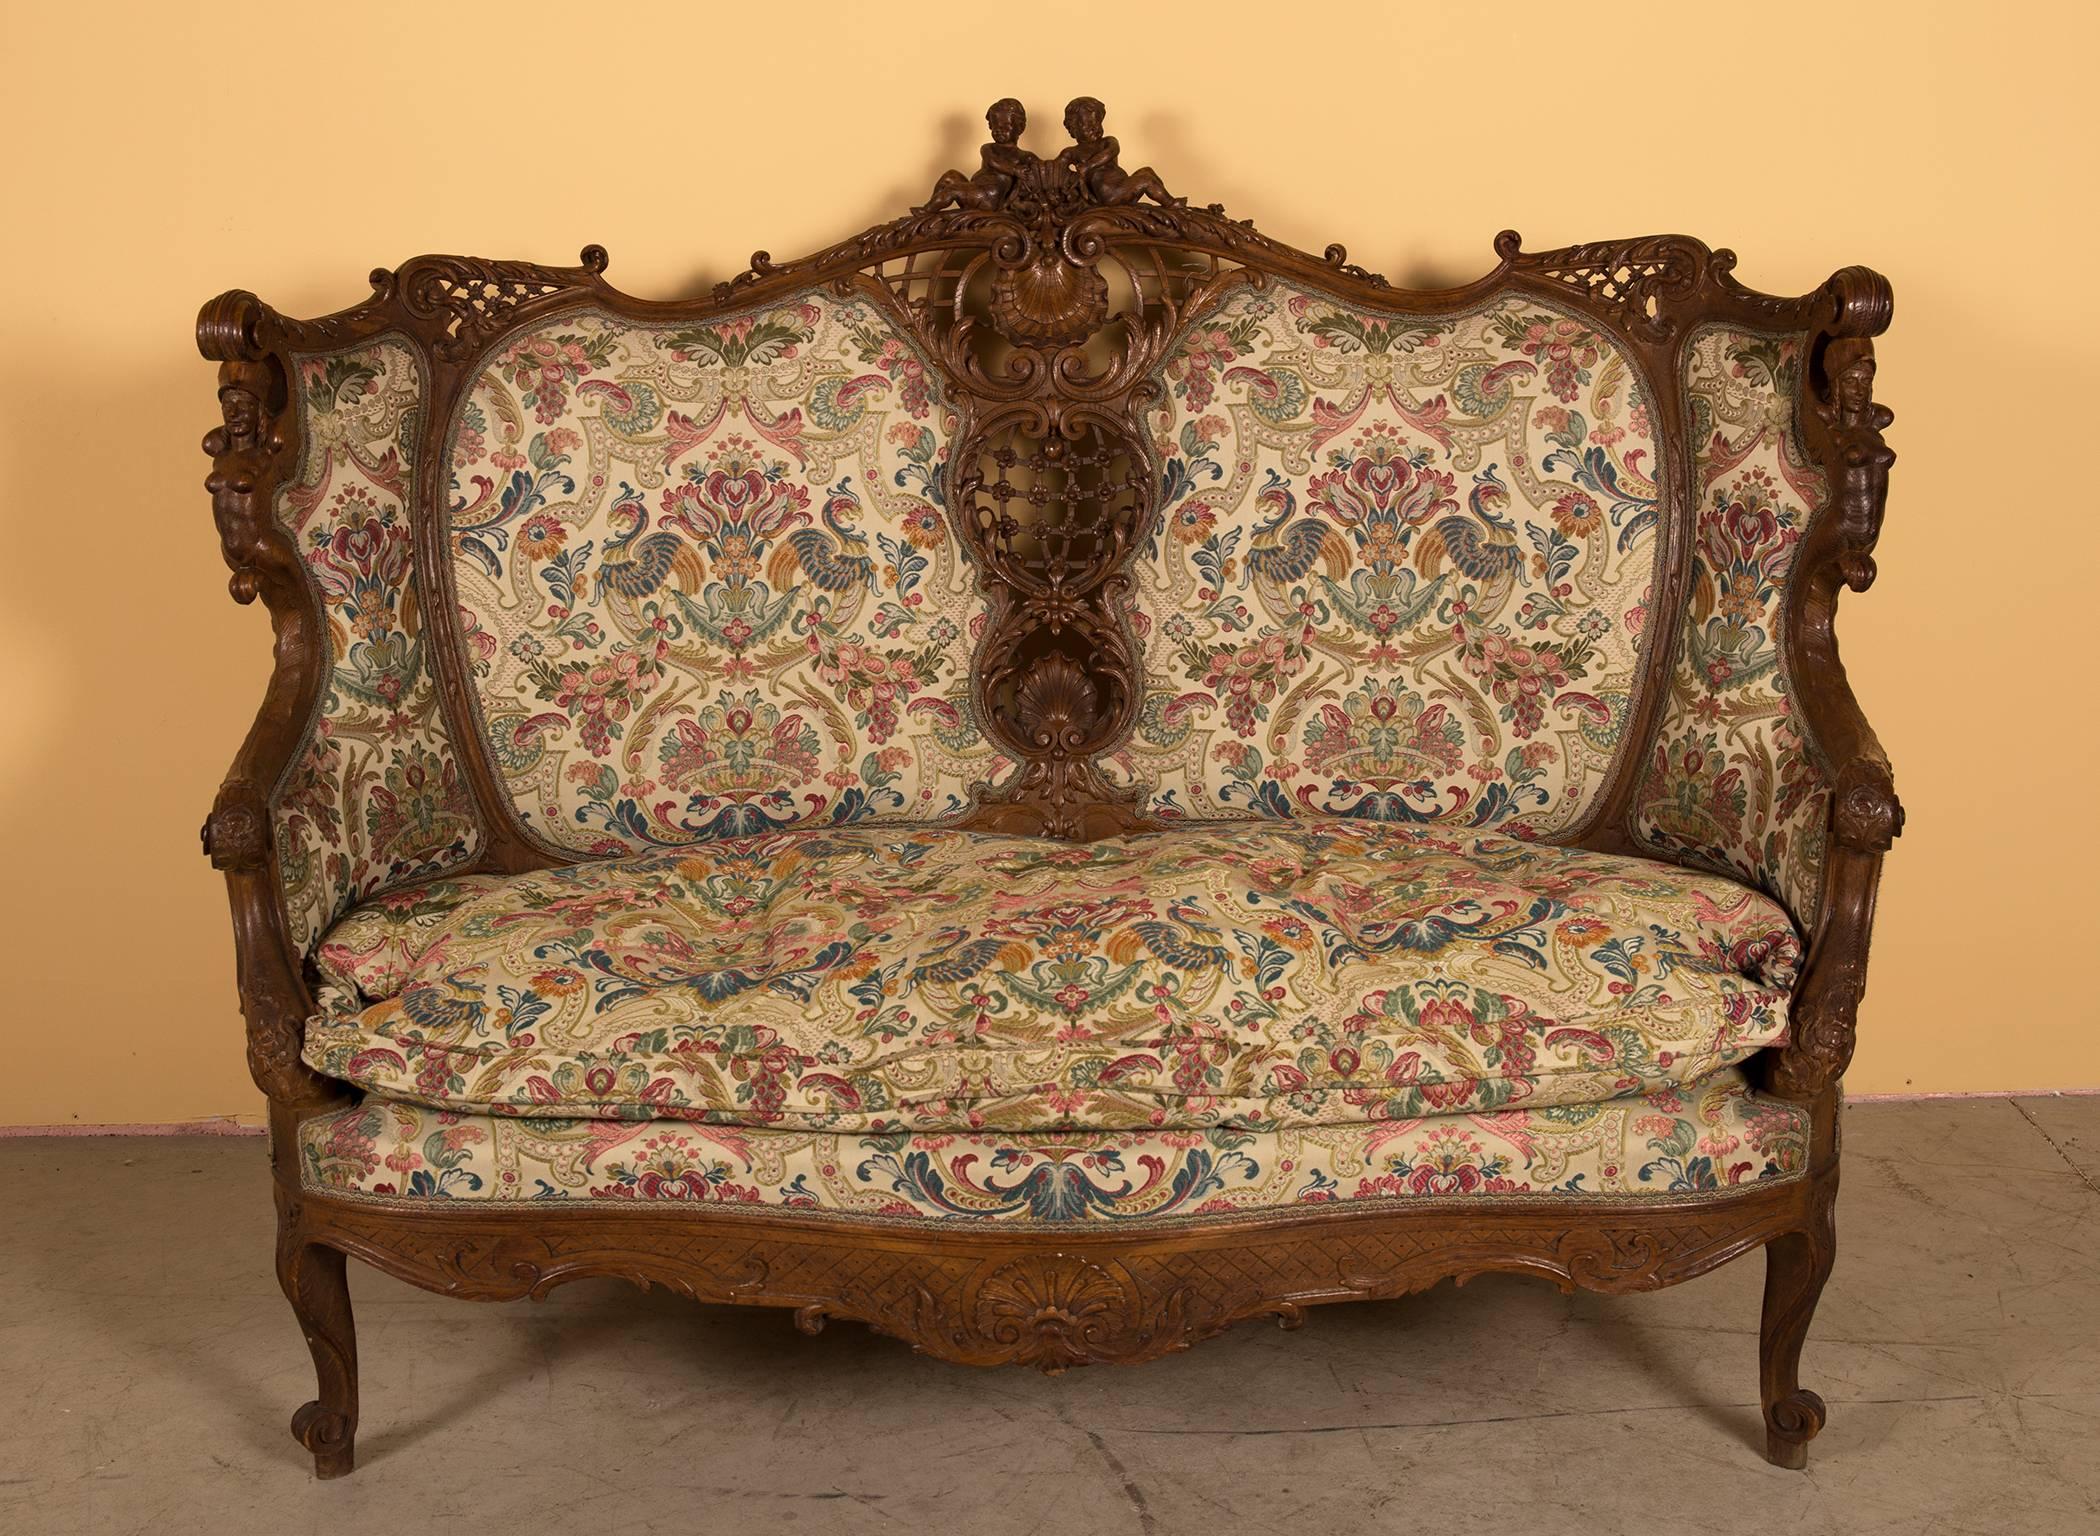 A three-piece Salon Suite with matching four-fold screen all in carved oak with luxurious upholstery and in good condition. One sofa and a pair of bergère chairs, the screen with four leaves of wood carved on the front and backside, cut-glass and